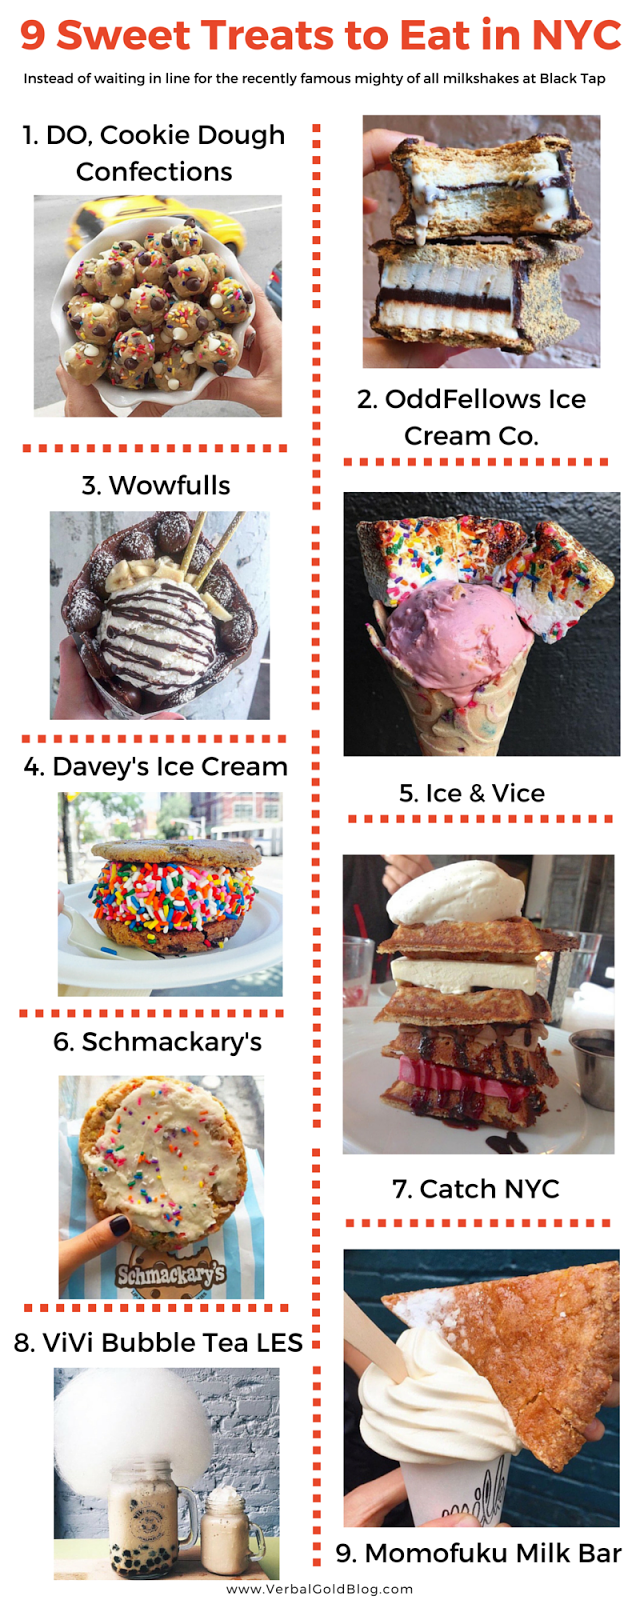 9 sweet treats to eat in NYC (instead of waiting in line for the recently famous mighty of all milkshakes at Black Tap)